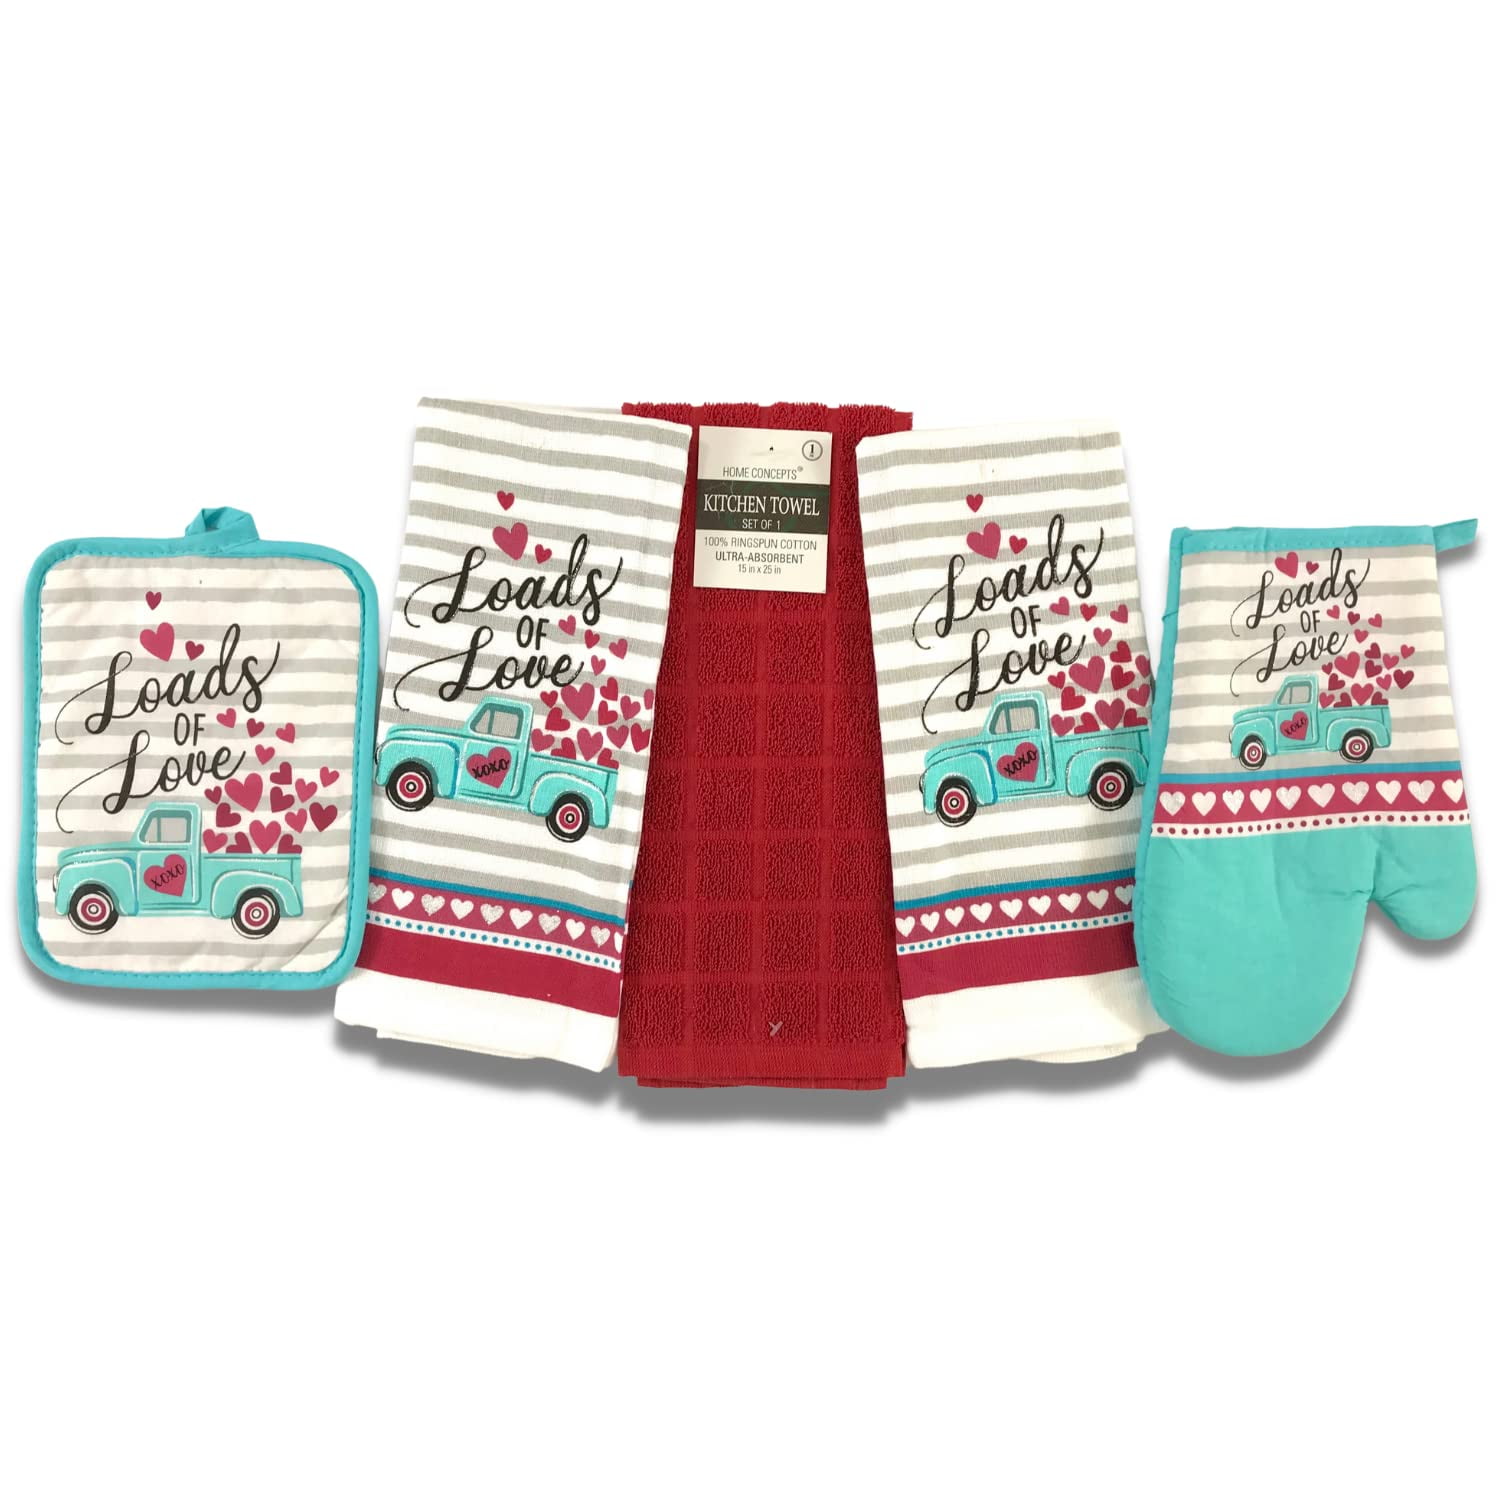 Kitchen Set Valentines Kitchen Towels and Oven Set: Dogs and Hearts Furr 2 Dish Towels 1 Pot Holder 1 Oven Mitt Ever 